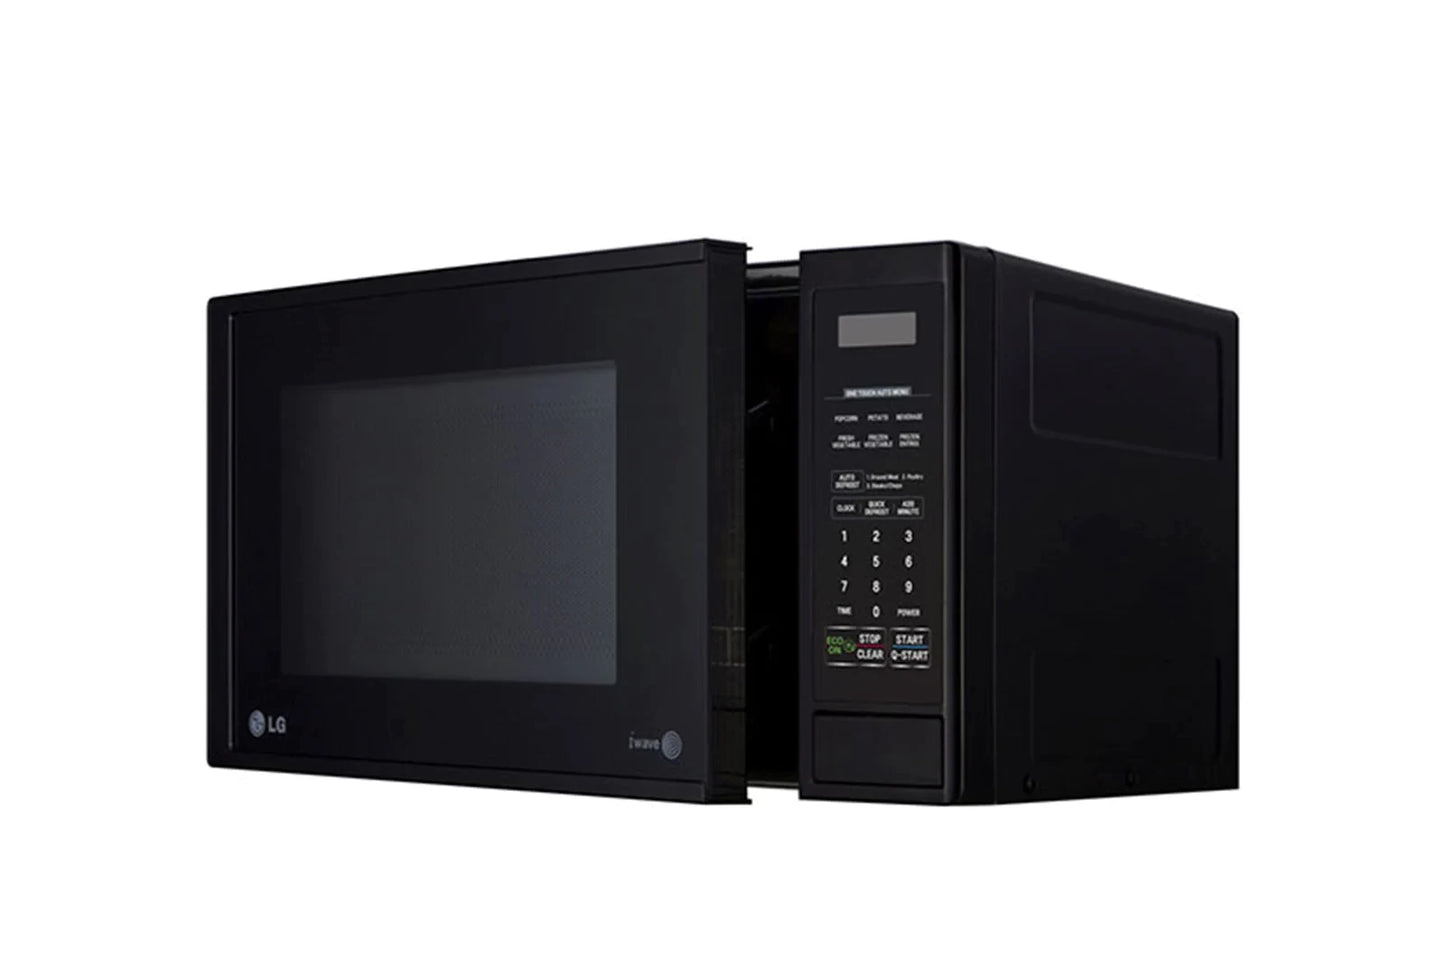 LG MS2044DMB 700W 20L Microwave Oven - MWO 2044